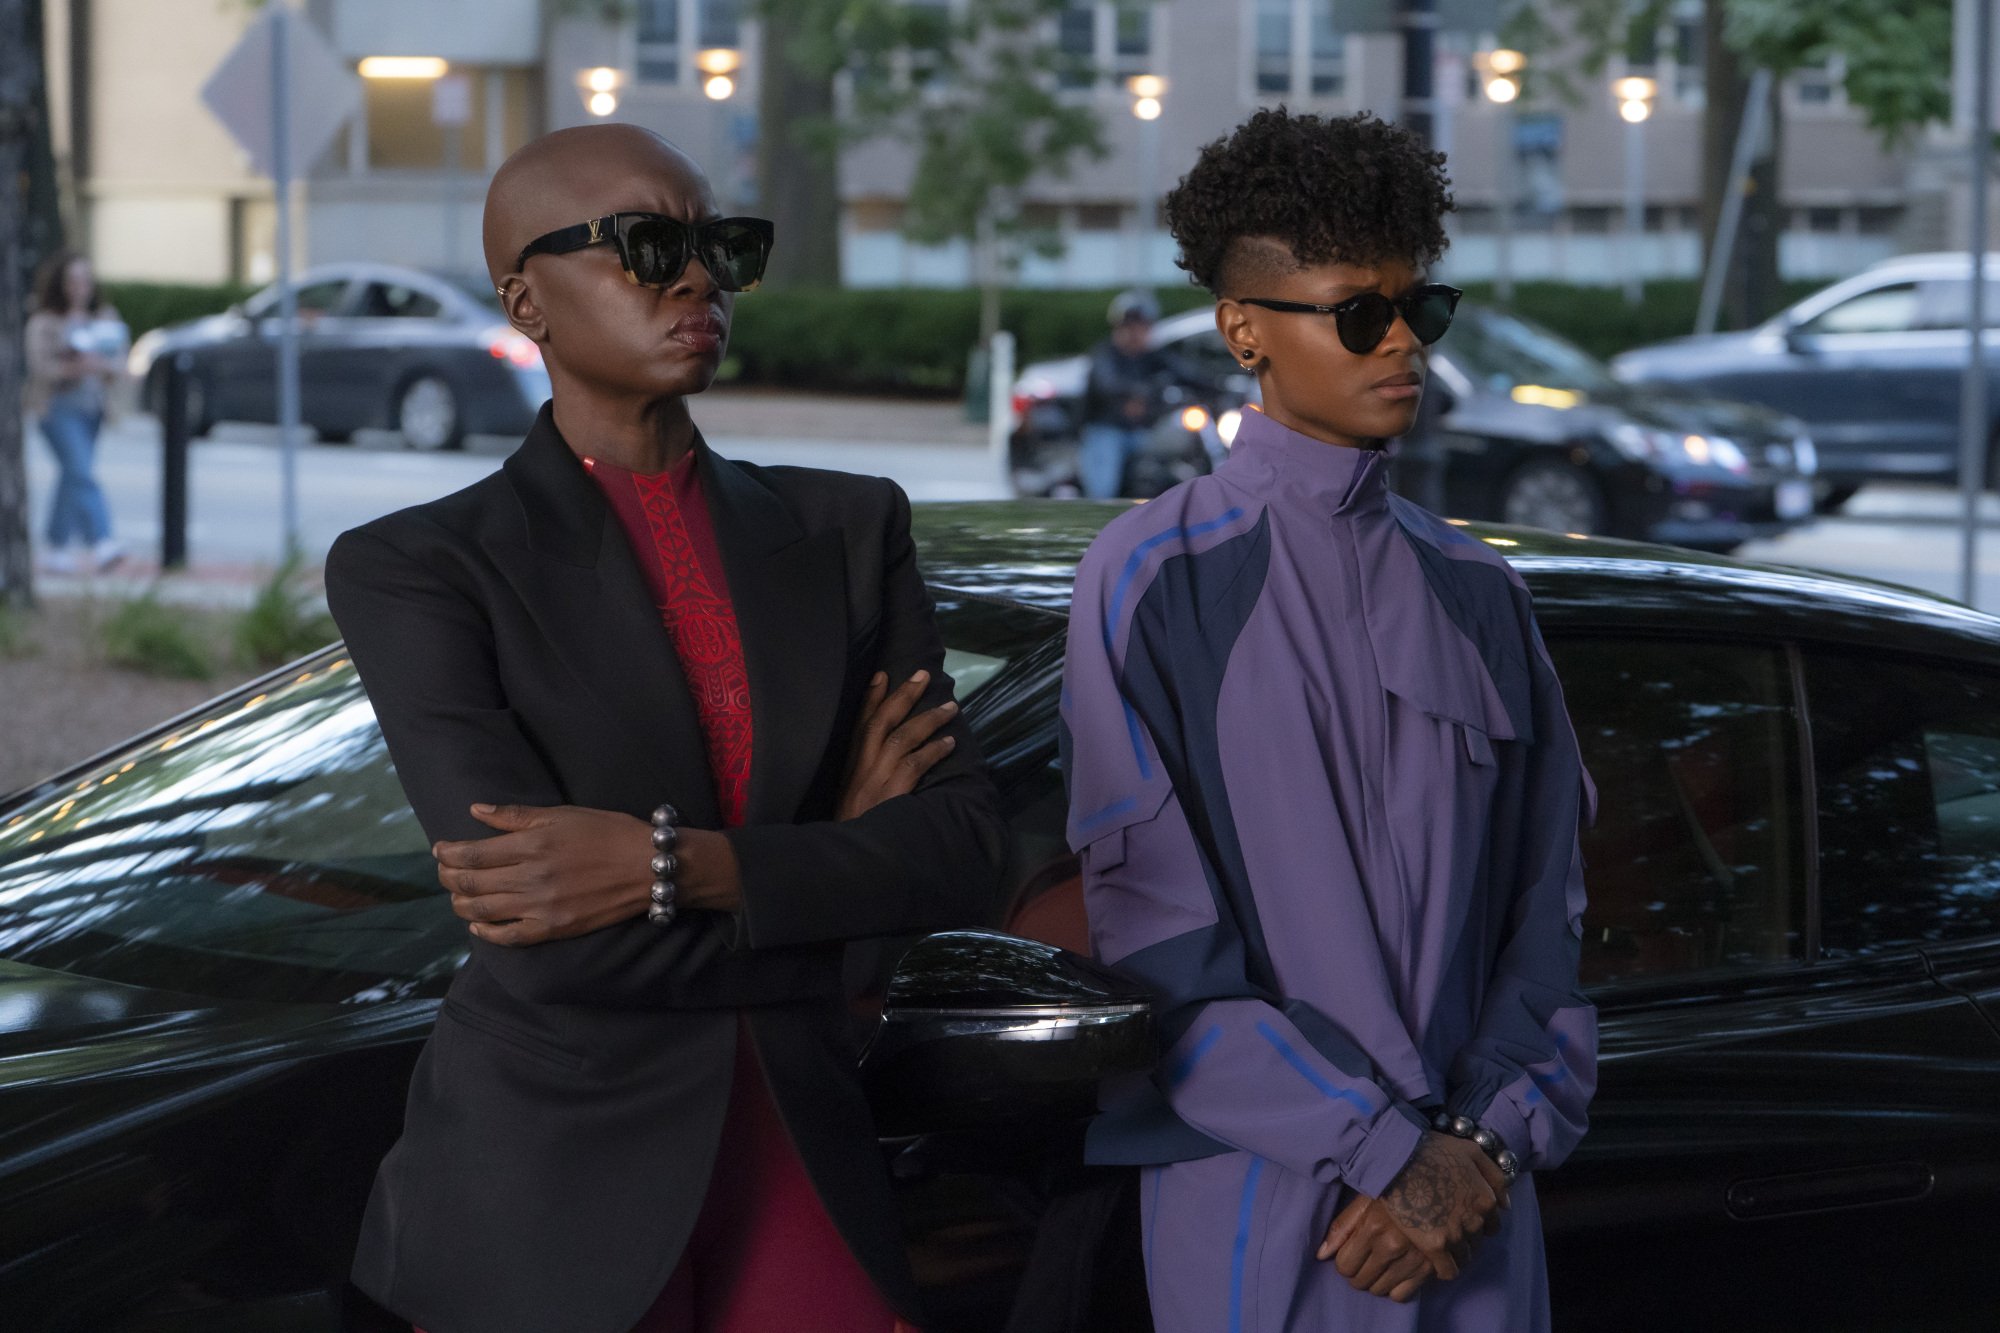 Two Black women in sharp outfits and sunglasses stand next to a sleek car.